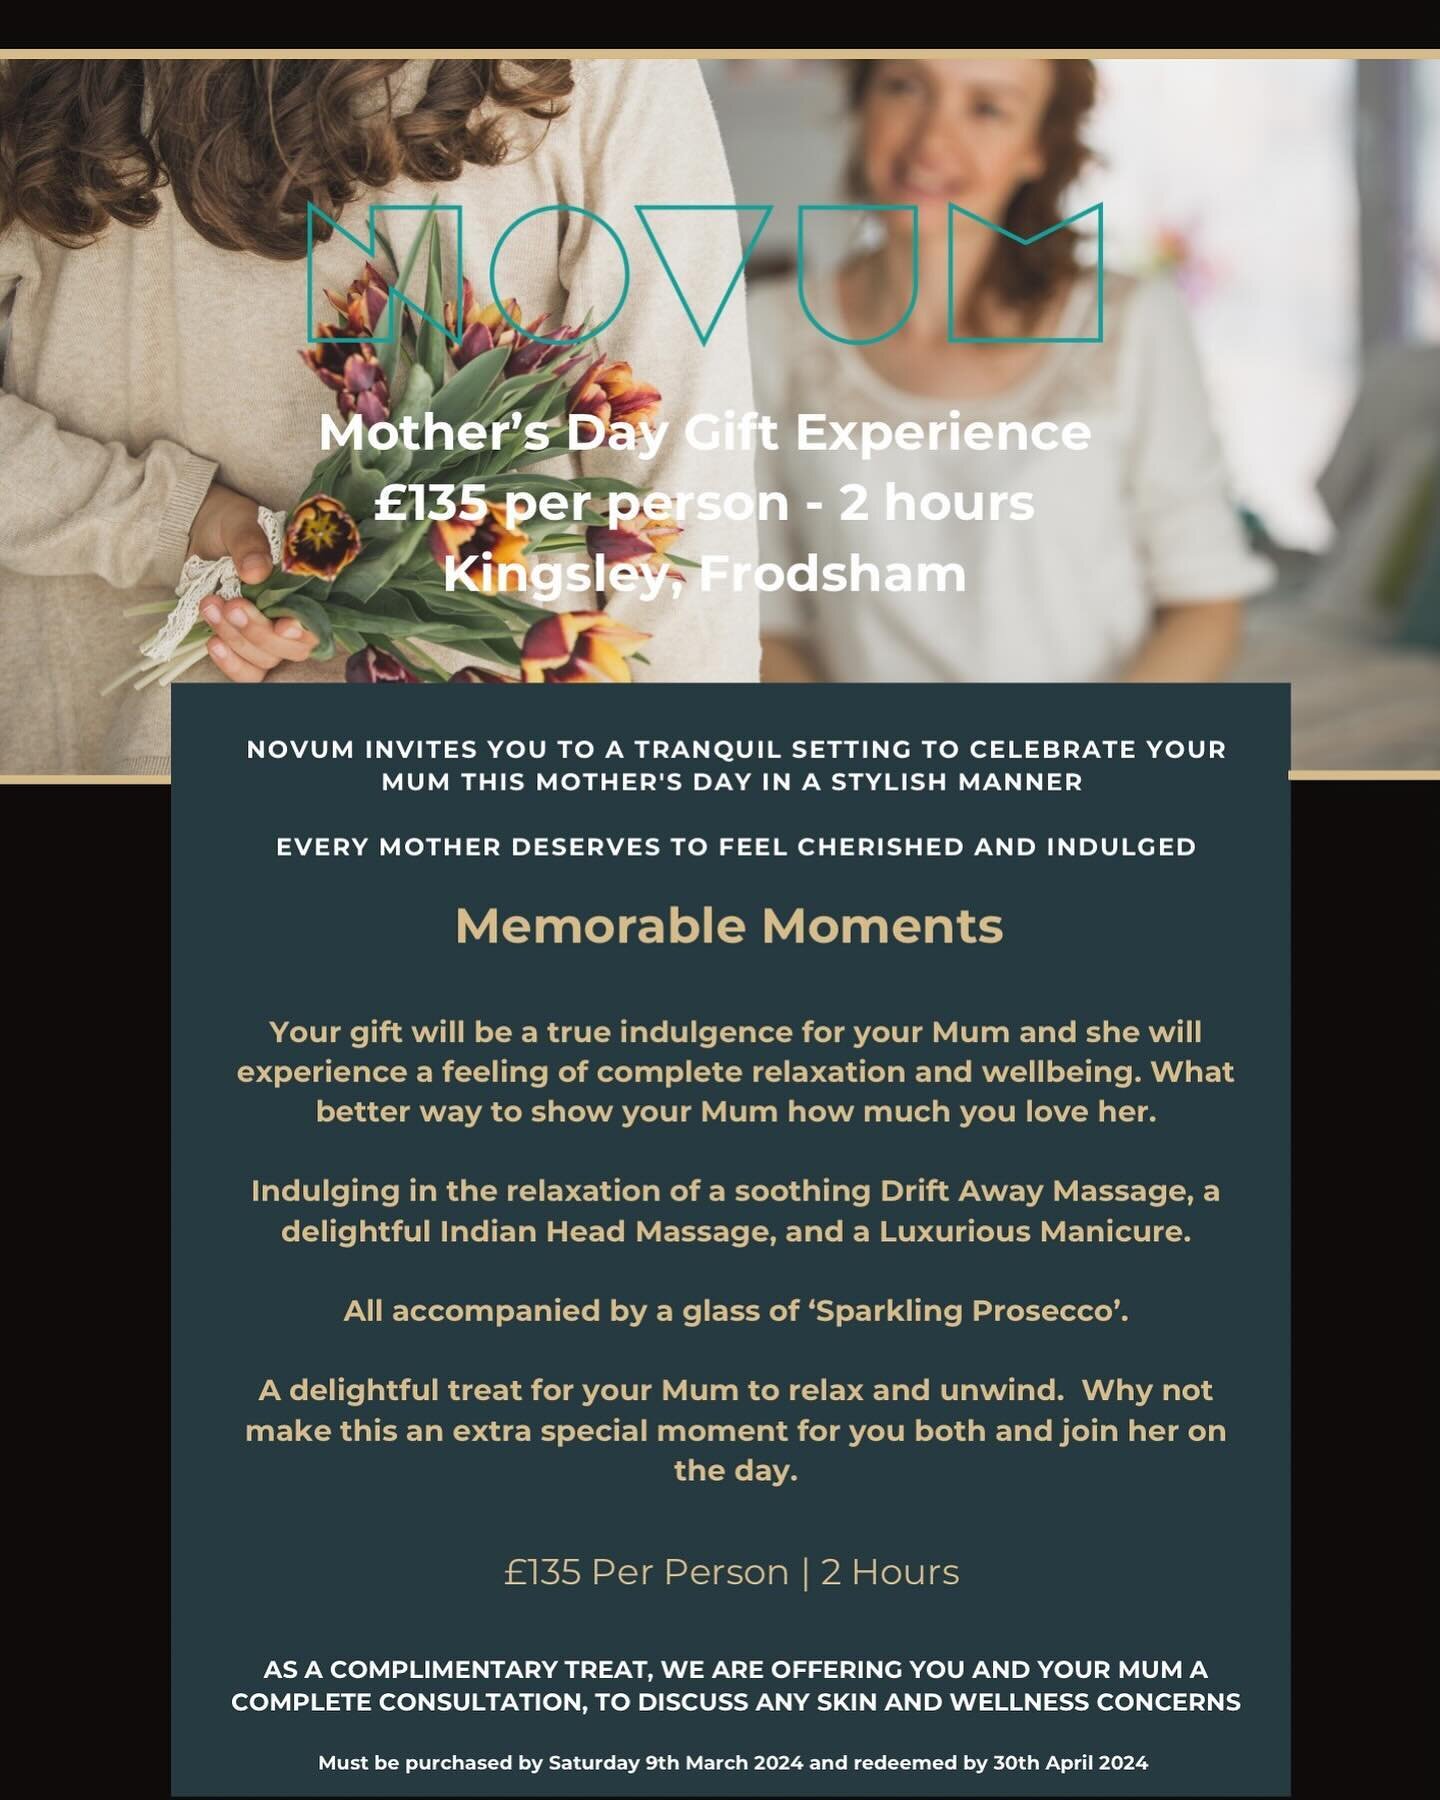 Mothers Day Gift Experience | Novum Kingsley

Novum invites you to a tranquil setting to celebrate your mum this Mother&rsquo;s Day in a stylish manner. A delightful treat for mums to relax and unwind or make this an extra special moment for both and